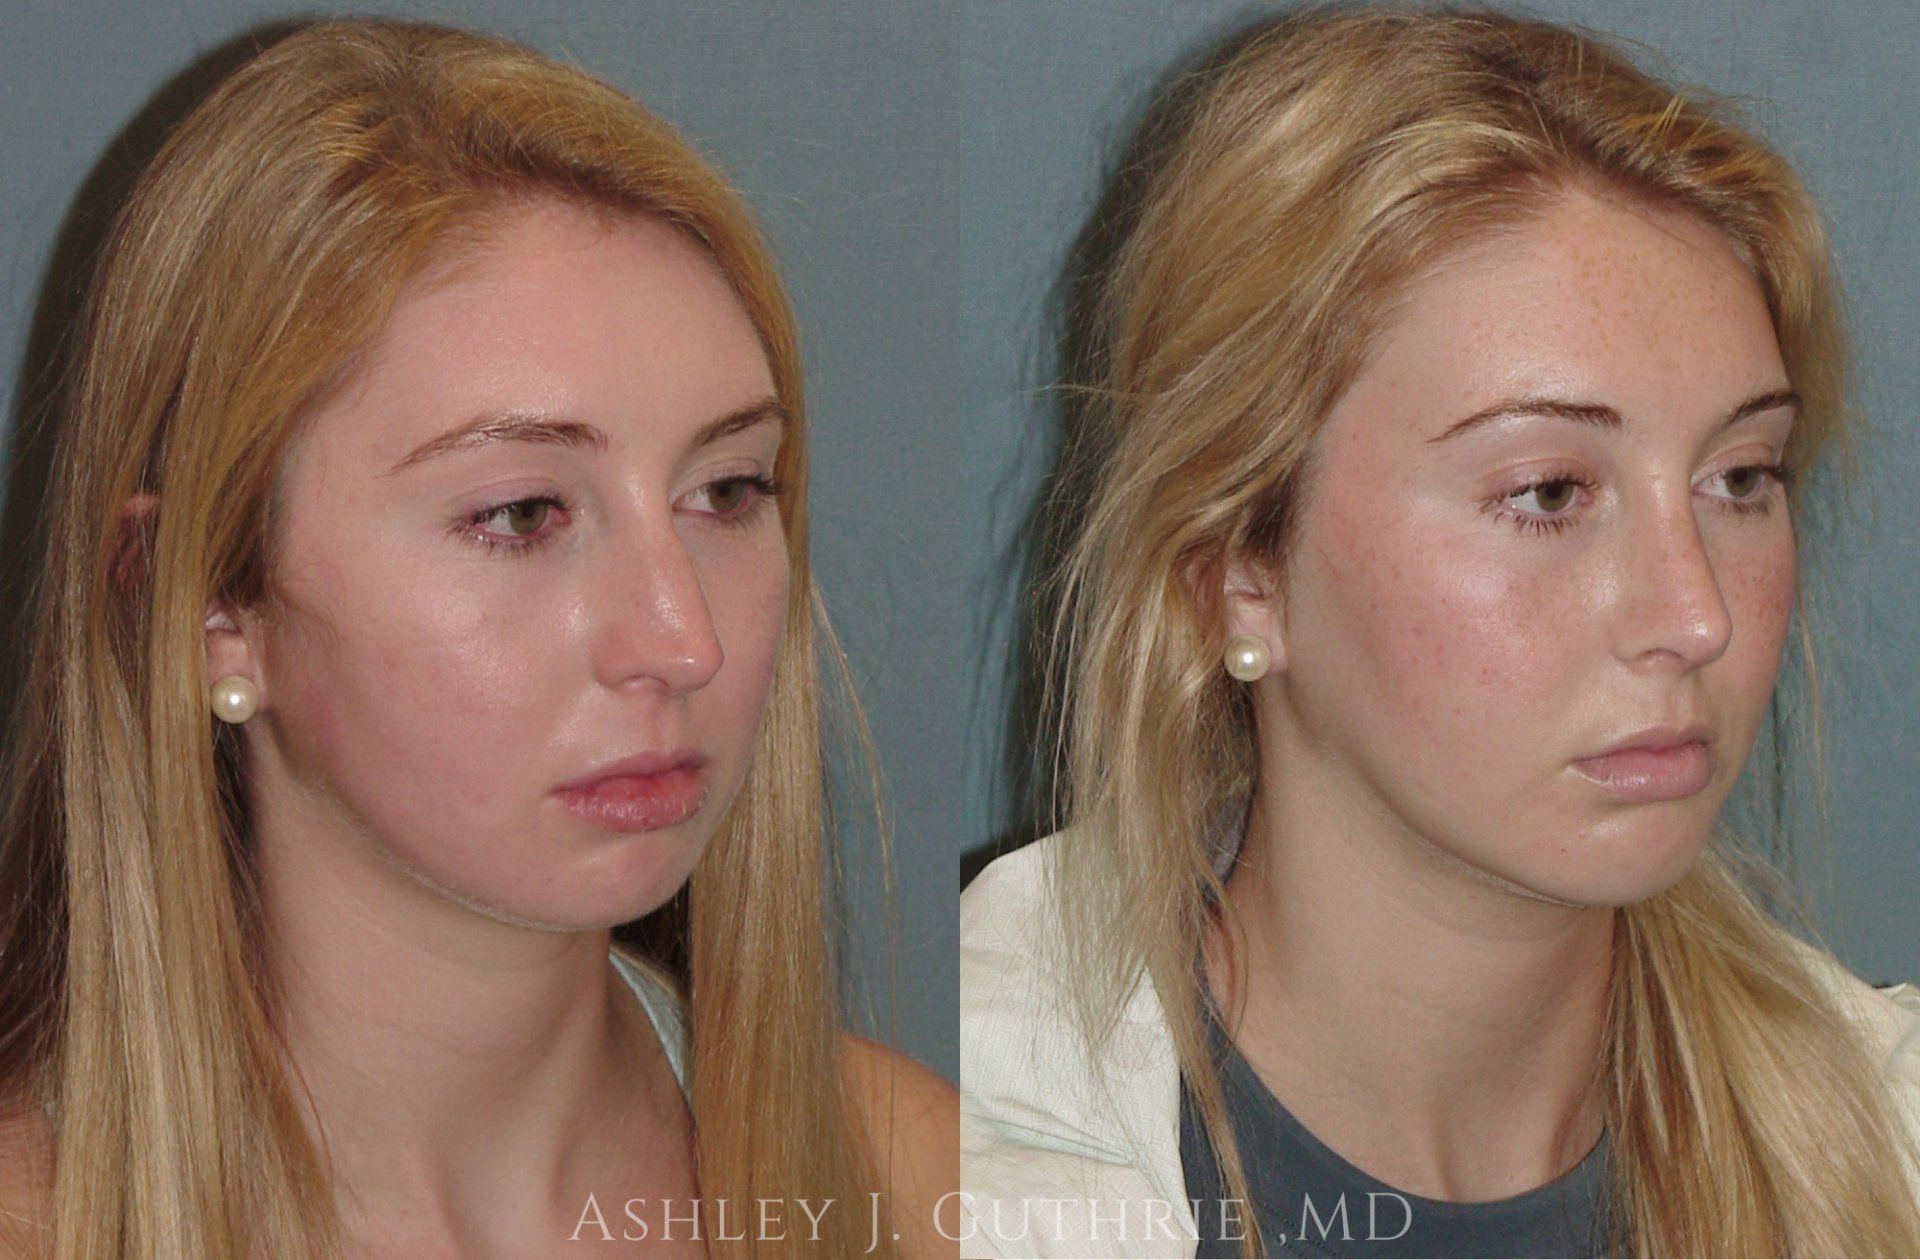 young woman before and after rhinoplasty and chin implant procedures